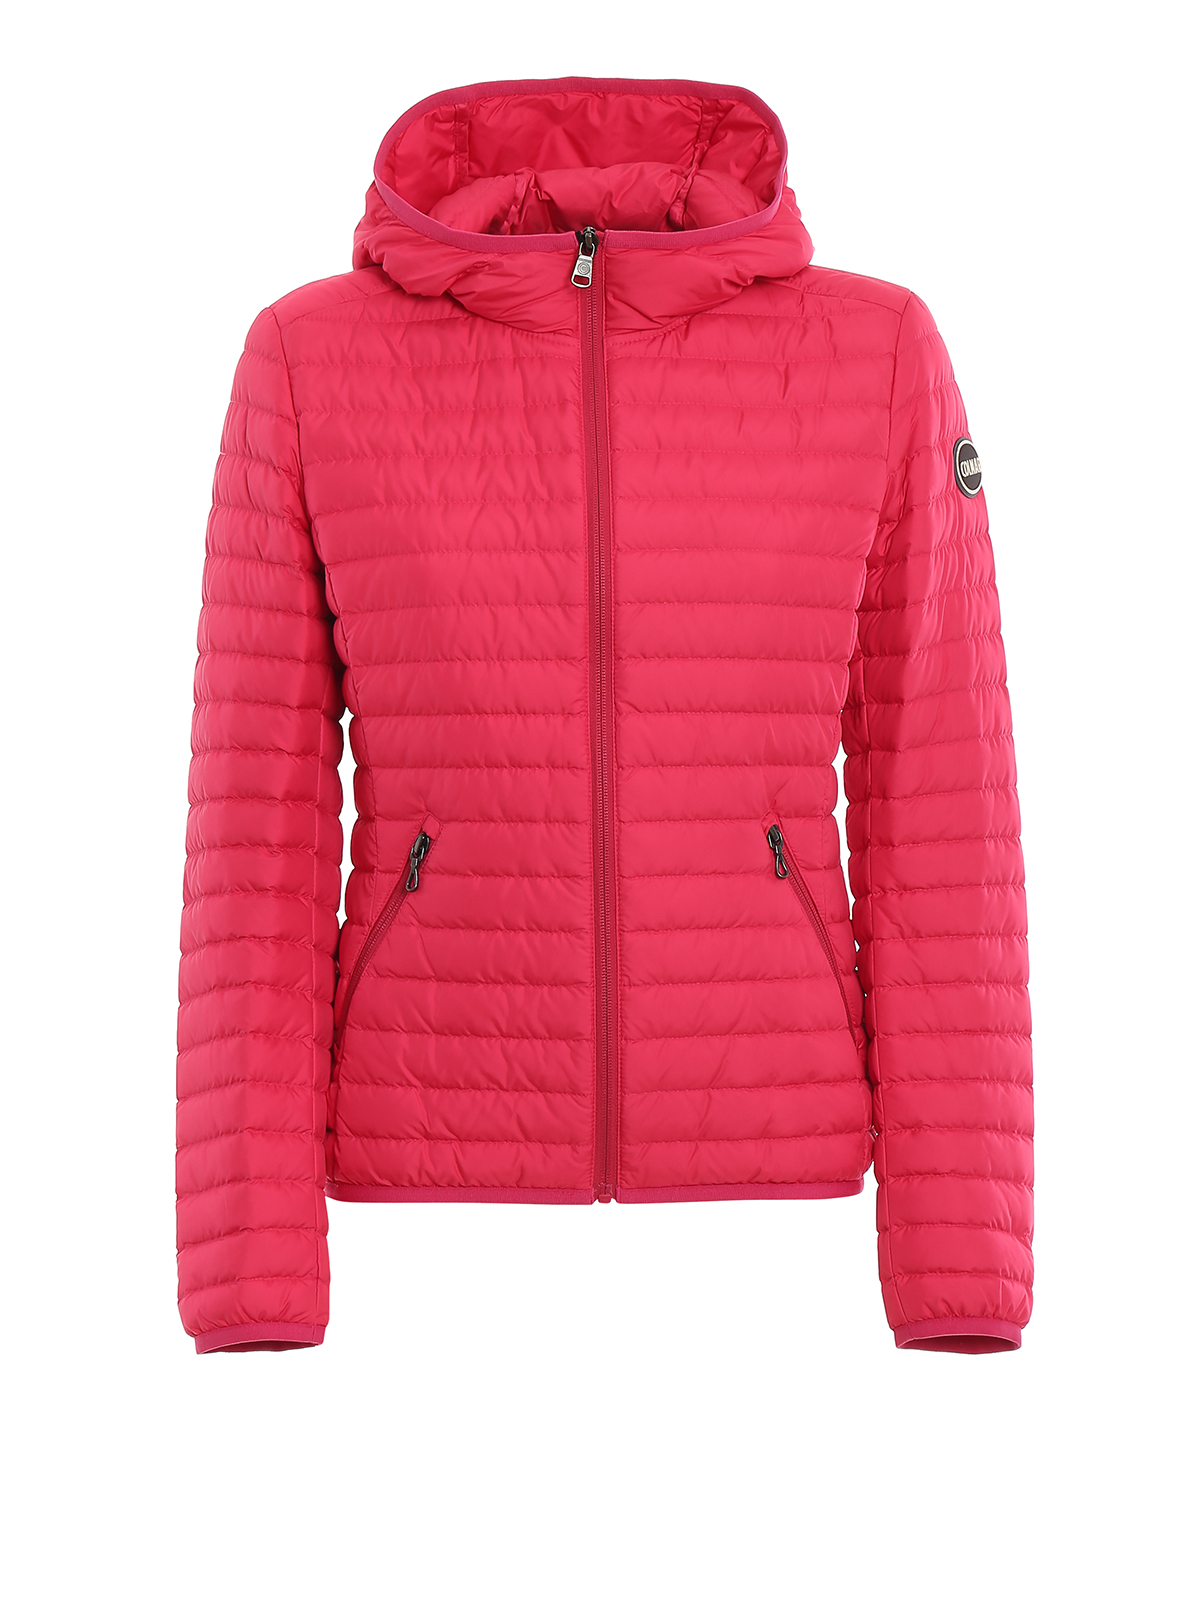 COLMAR ORIGINALS HOODED QUILTED PUFFER JACKET